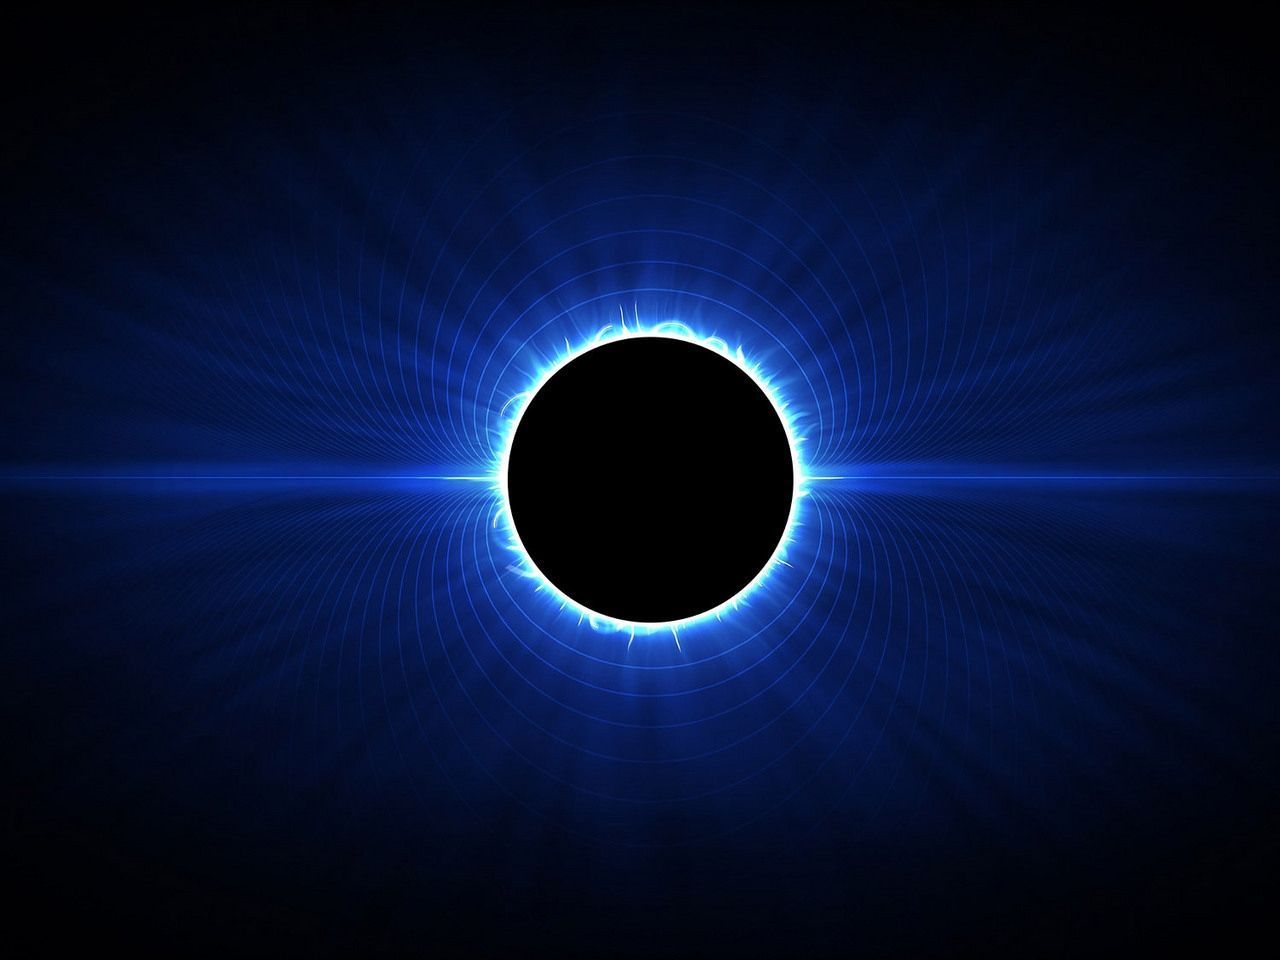 Download Wallpaper 1280x960 Abstraction, Eclipse, Space, Light